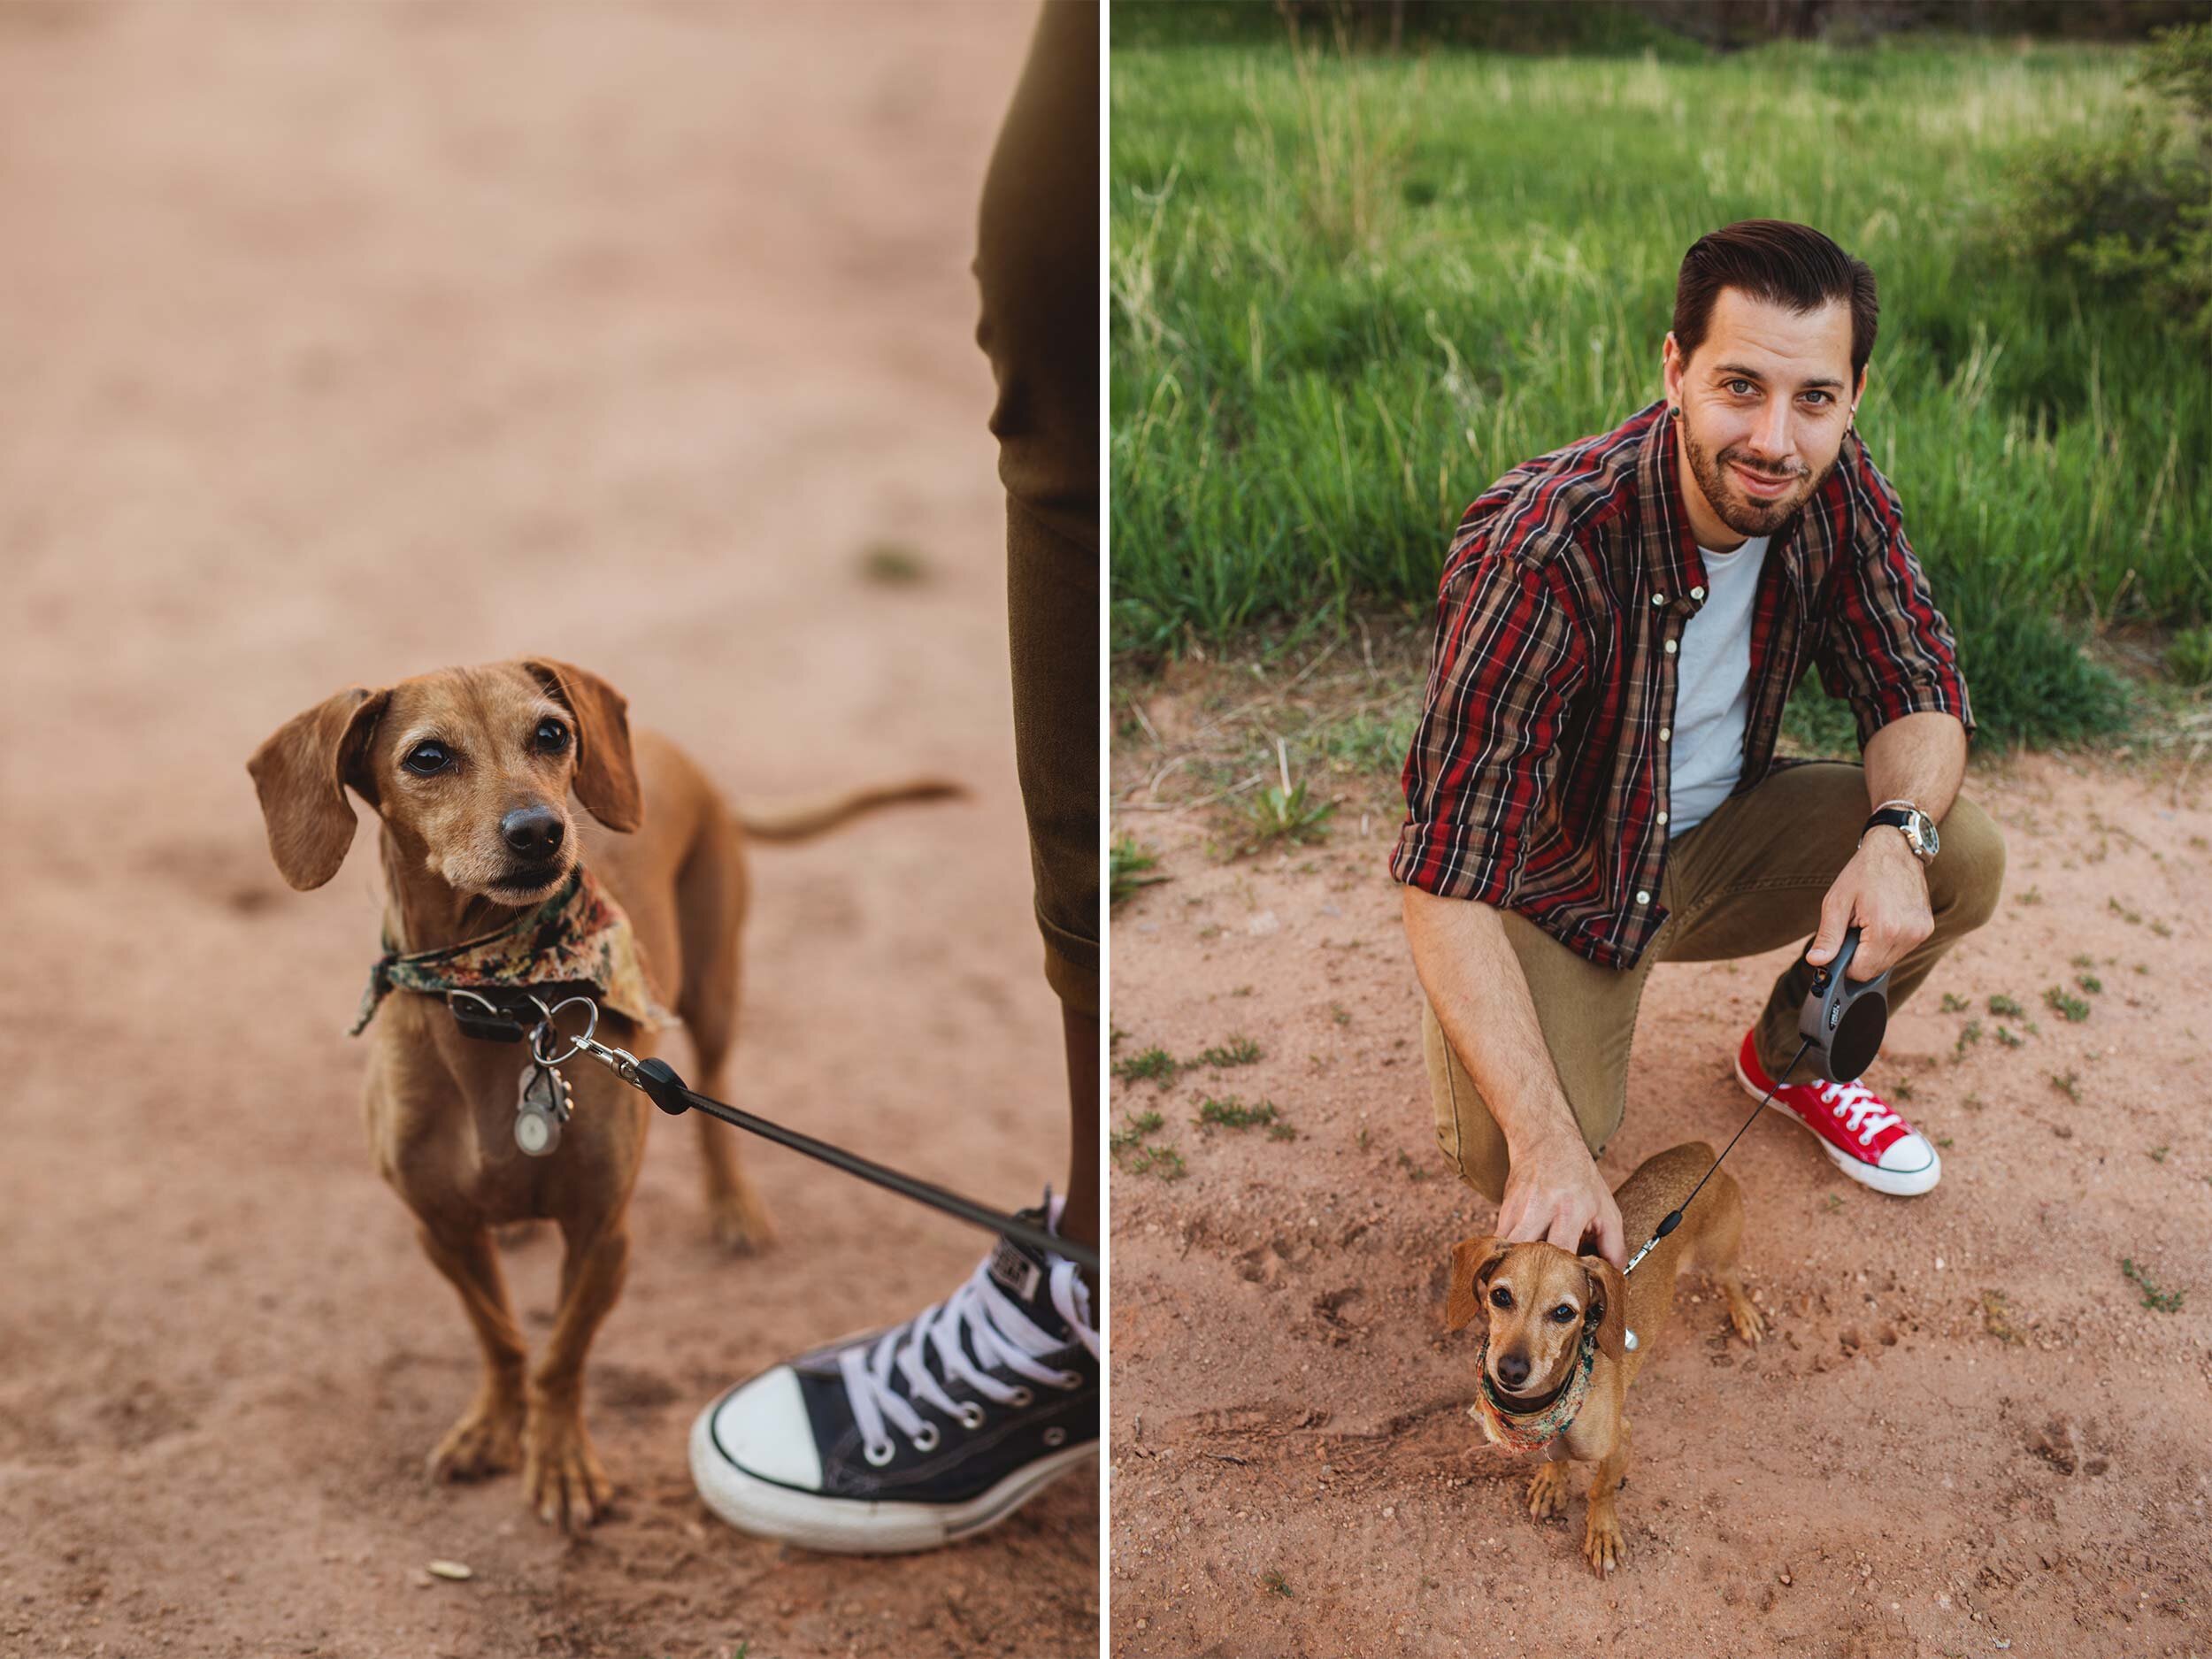 little brown dog with short hair looking up at its owner side by side with a shot with them together, the man crouching with chuck Taylors